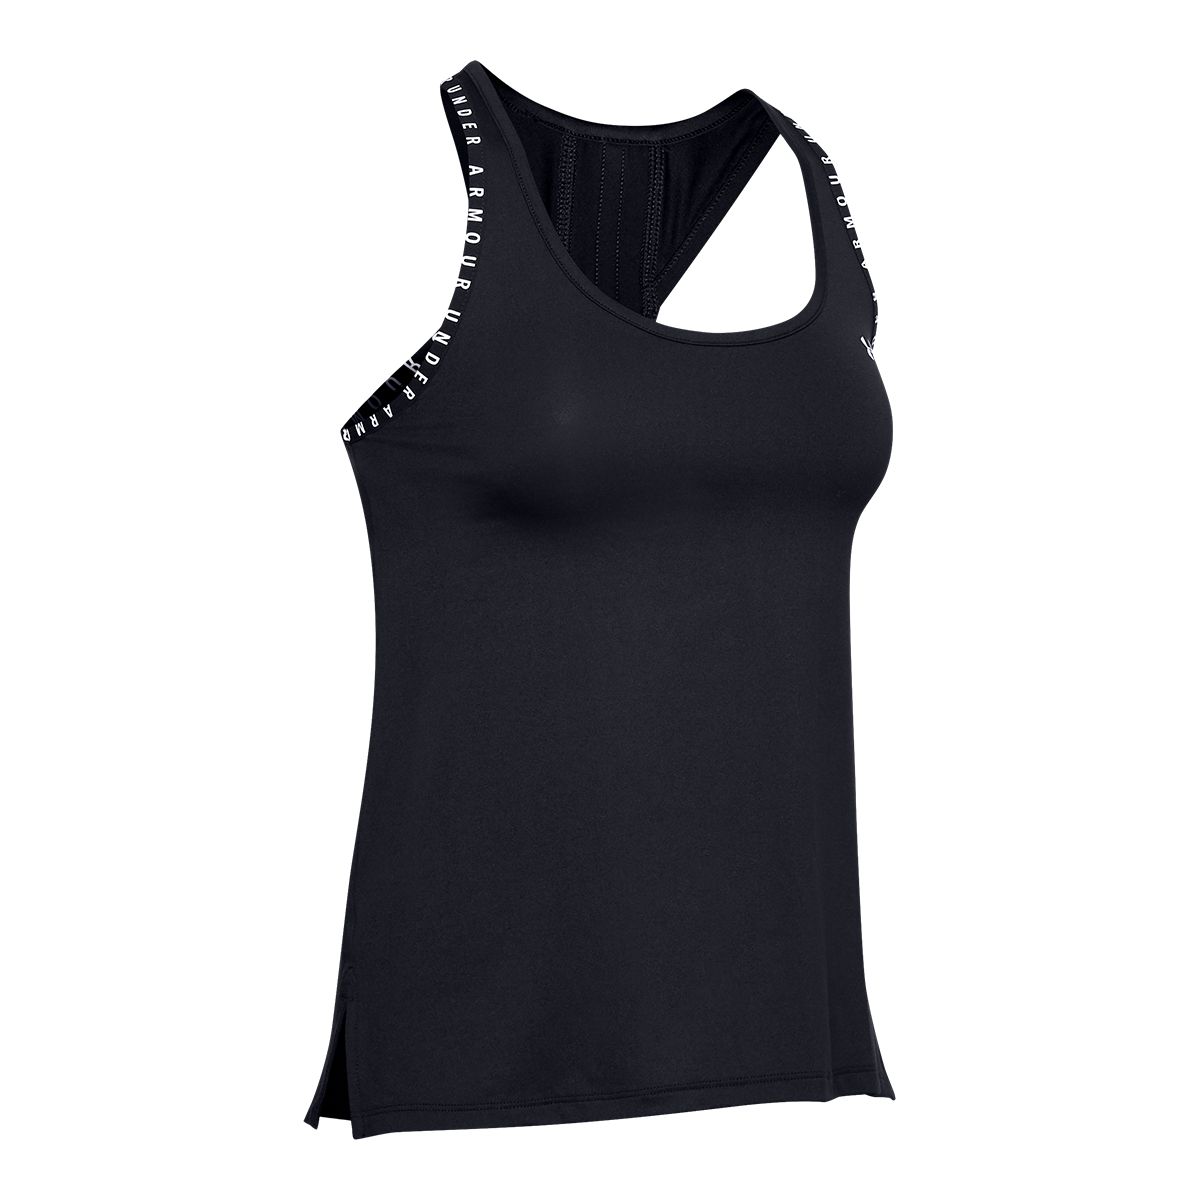 Fwd. Women's Racerback Tank Top, Fitted Fit, Sleeveless, Sports